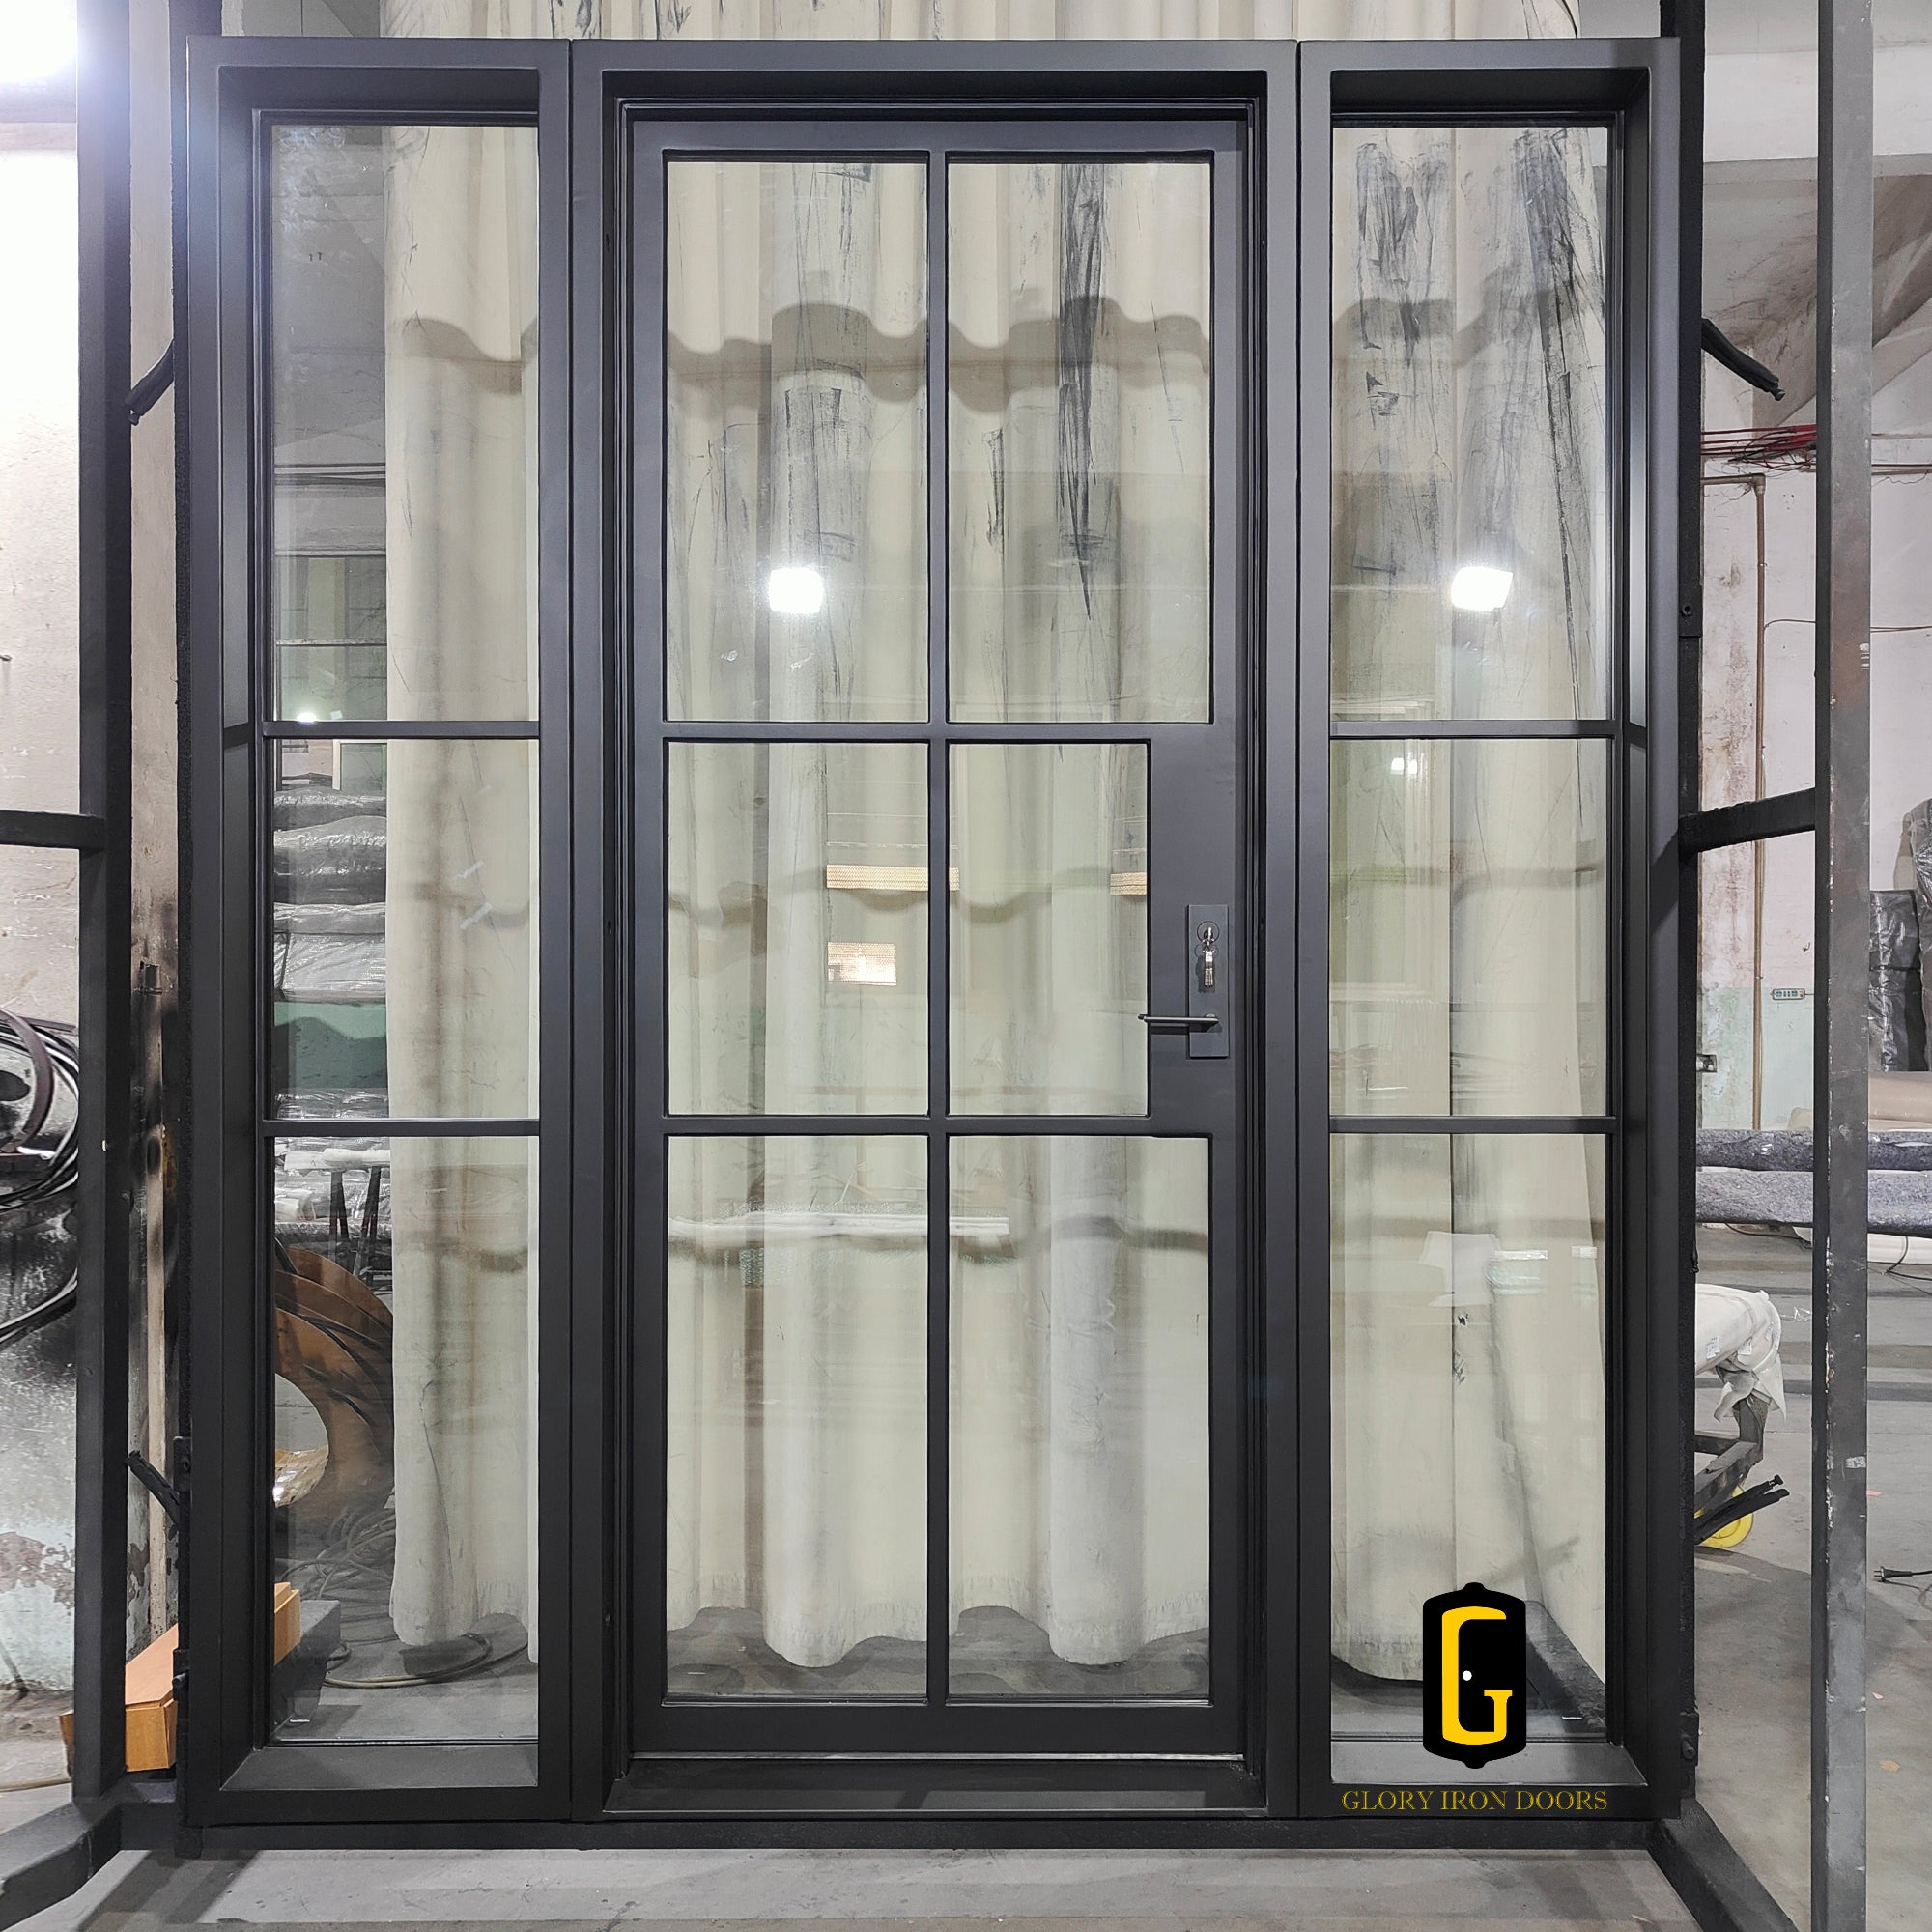 gloryirondoors thermal break single door with two sidelights and clear glass